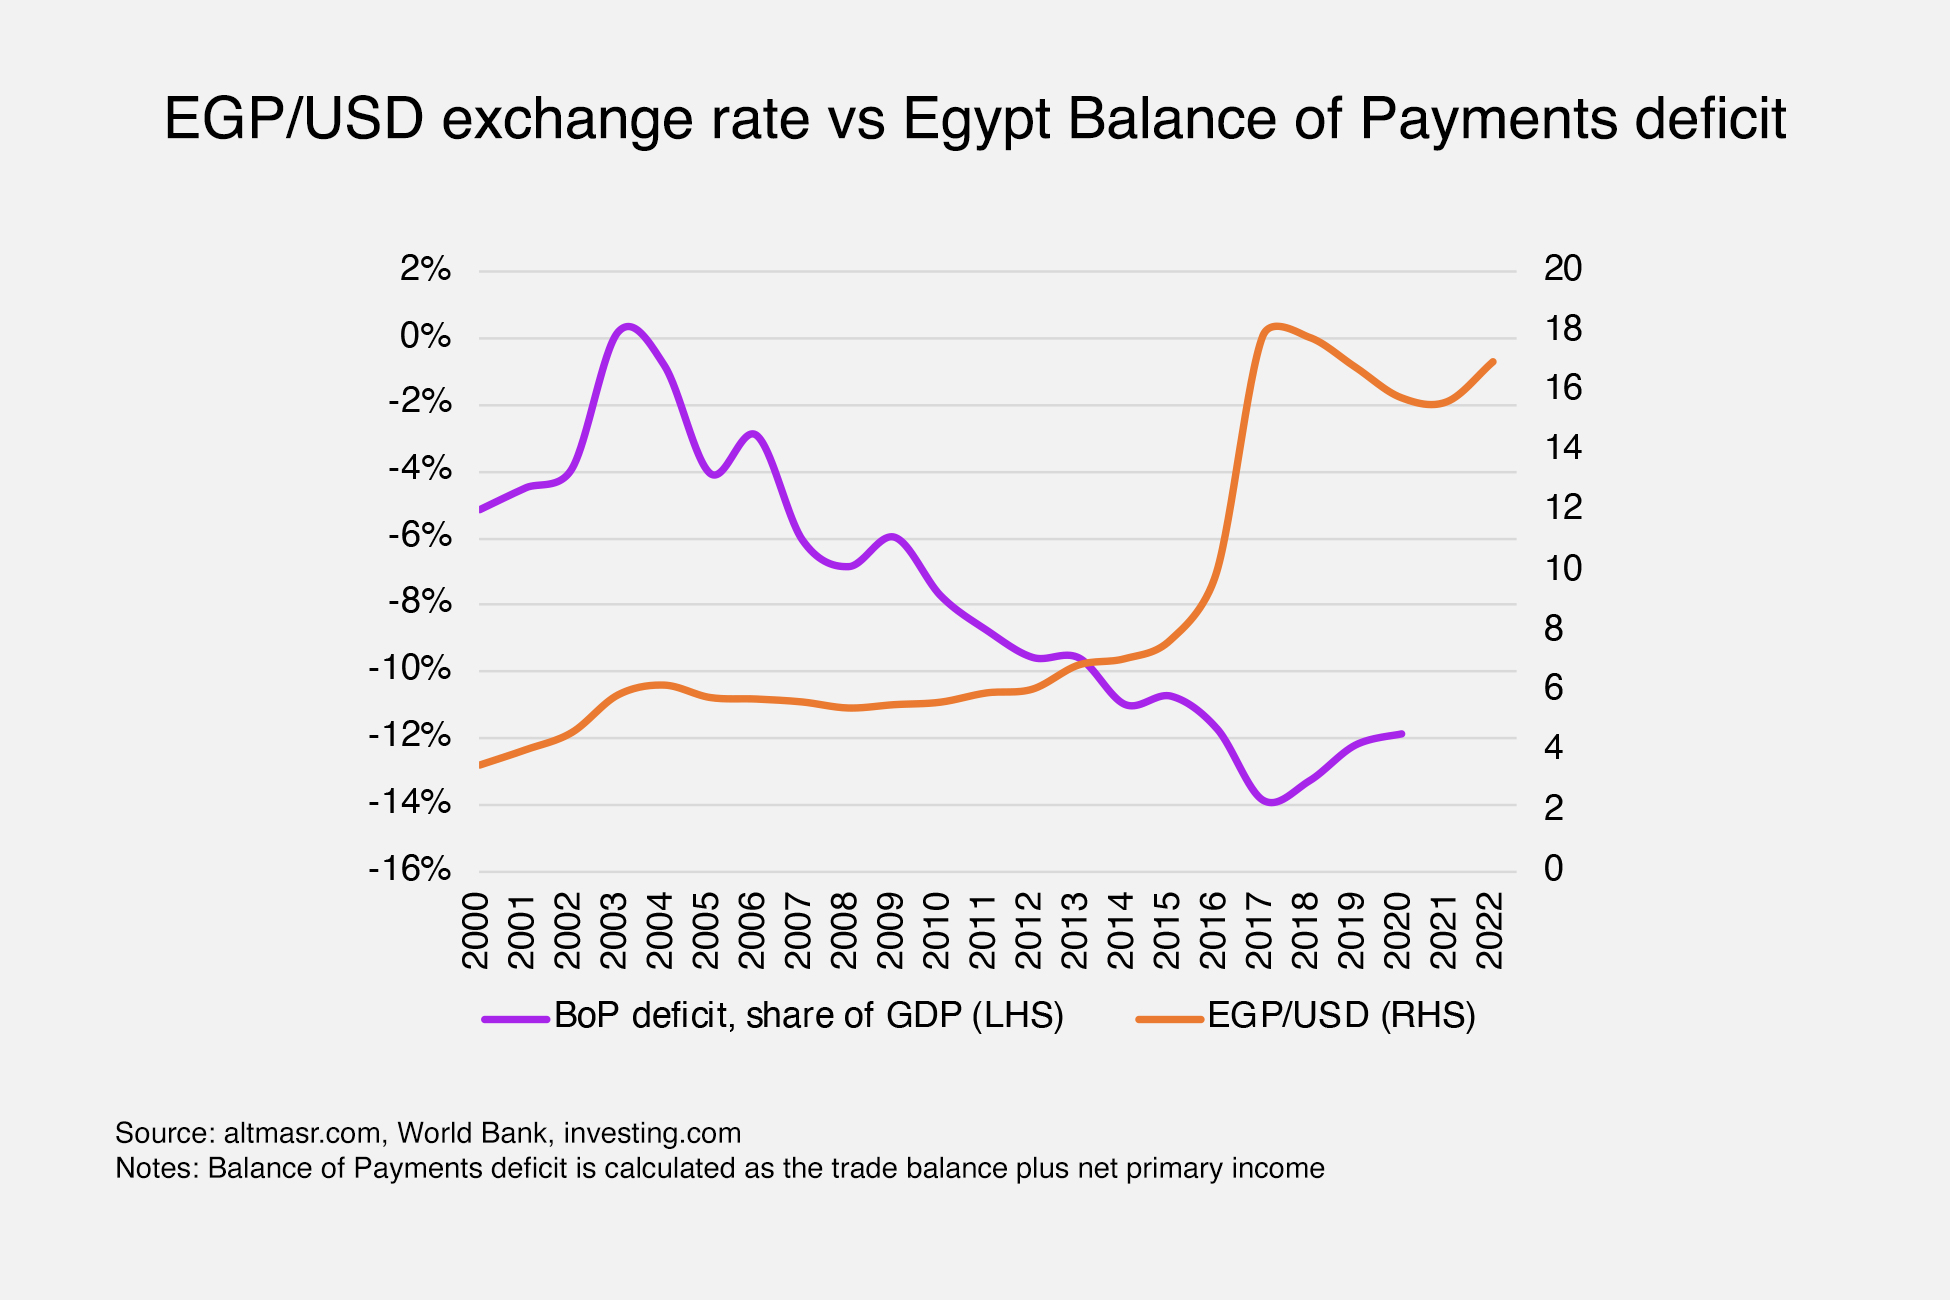 Chronic balance of payments deficits are affecting Egypt's currency